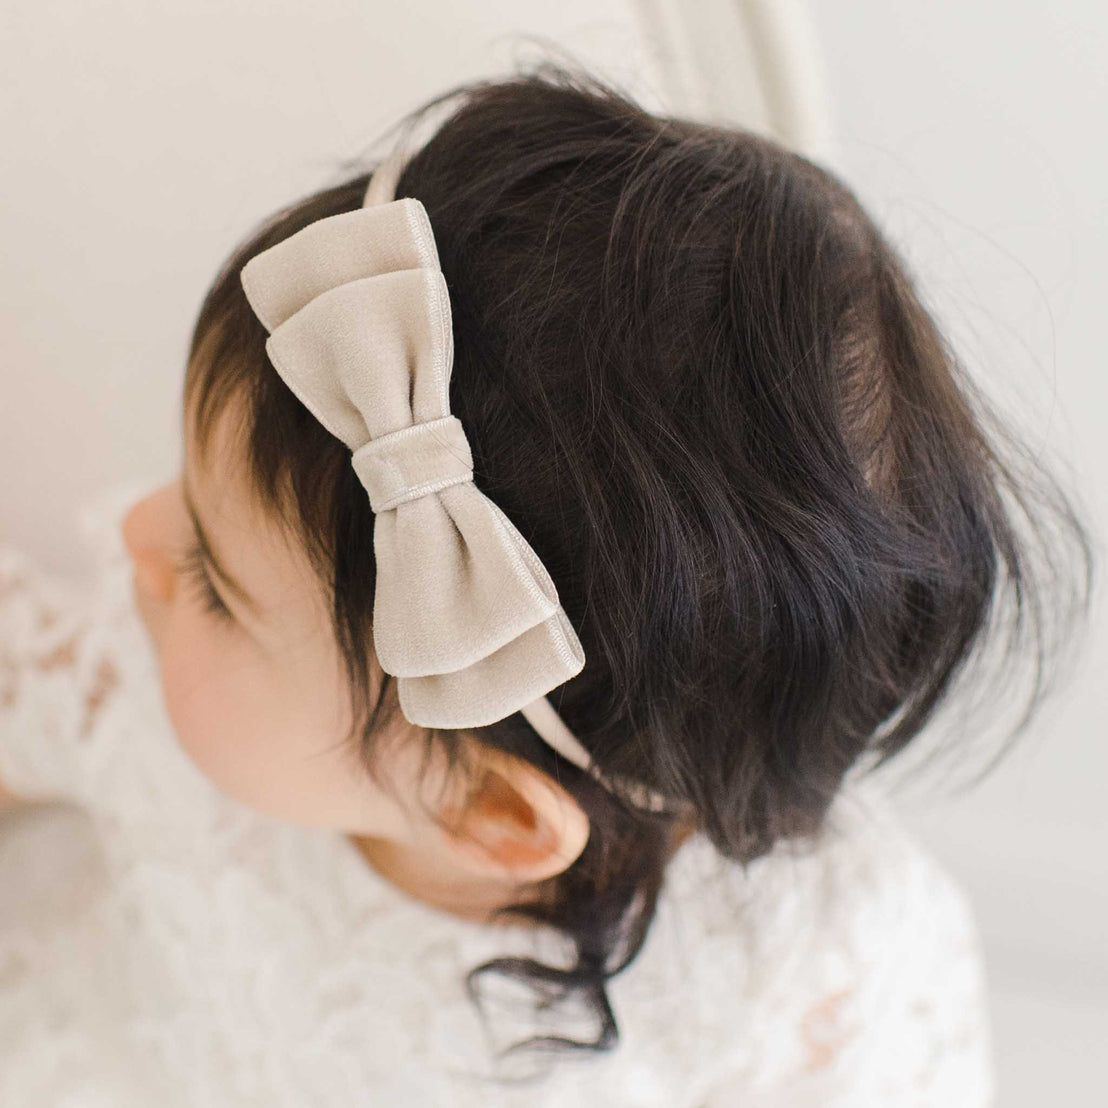 A close-up image of a baby wearing a Rose Velvet Bow Headband on her dark hair, focusing on the top and side of her head against a soft, light background.